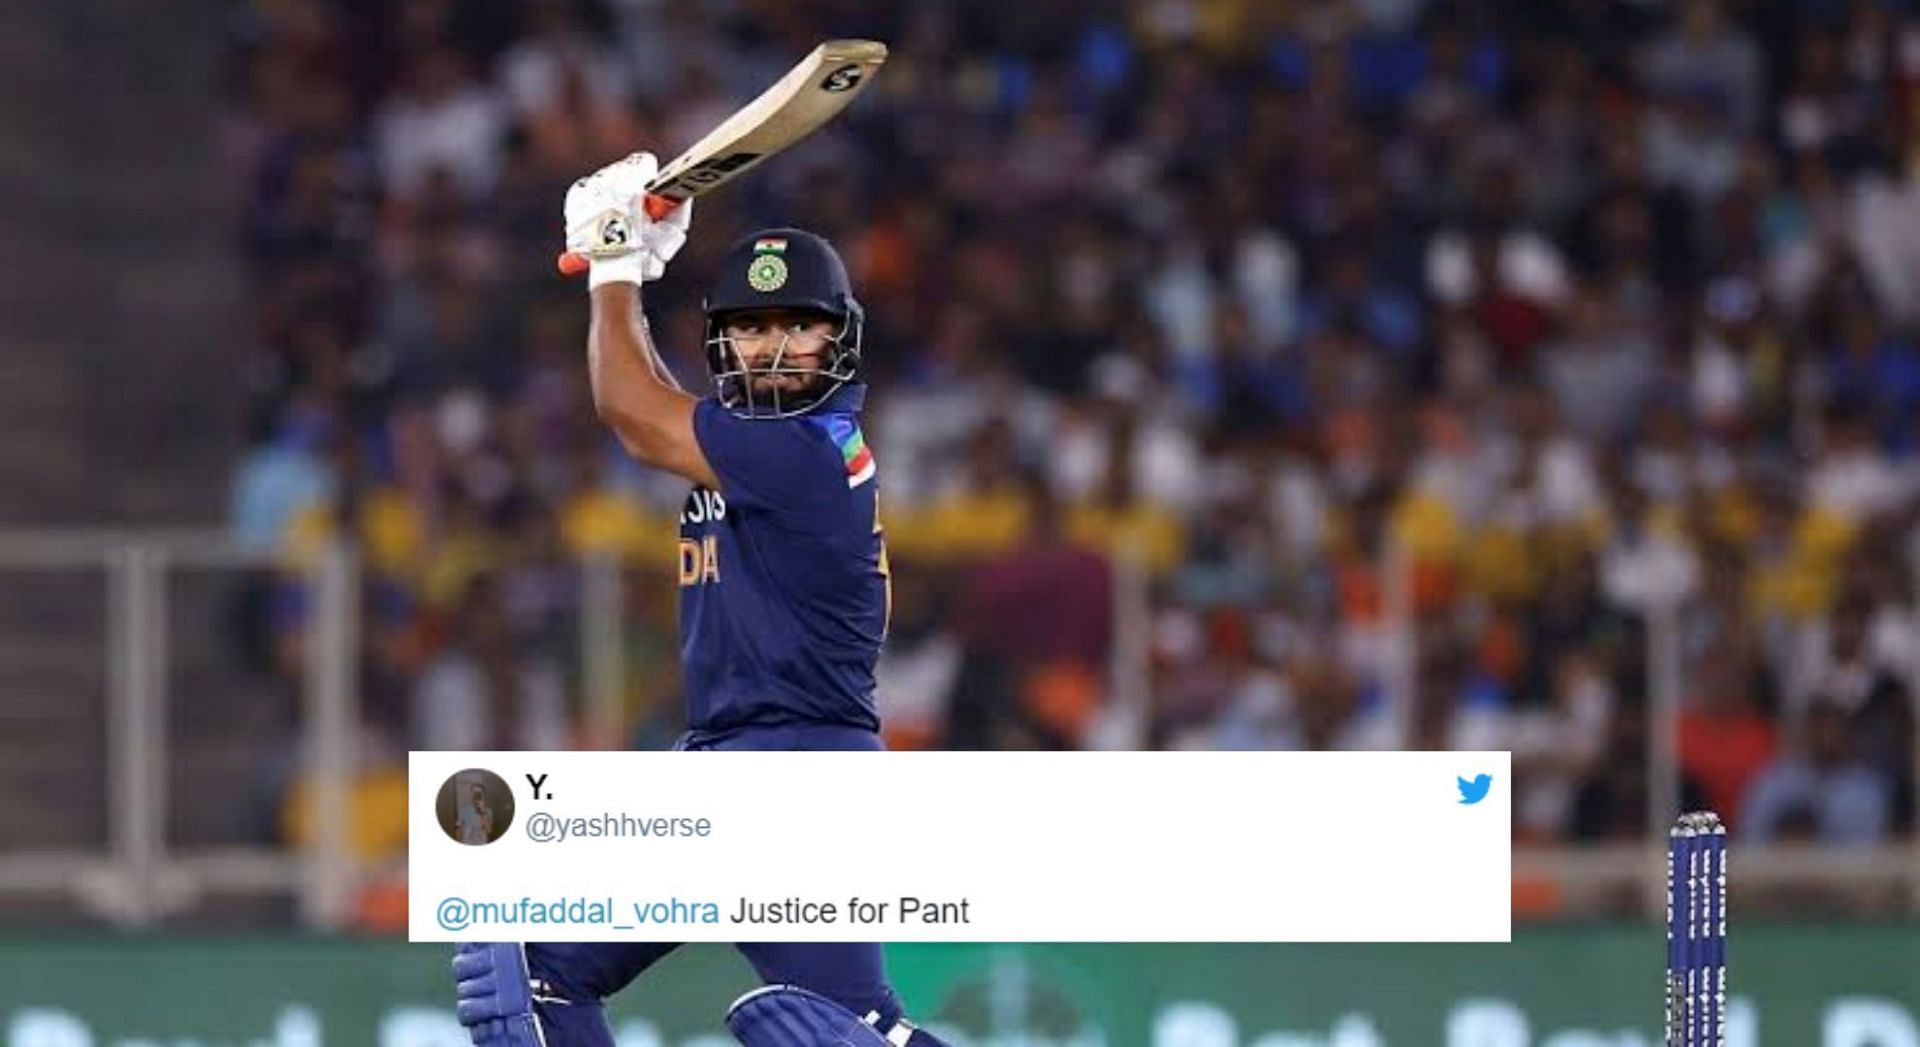 T20 World Cup 2022 “Justice for Pant” Fans react as Rishabh Pant